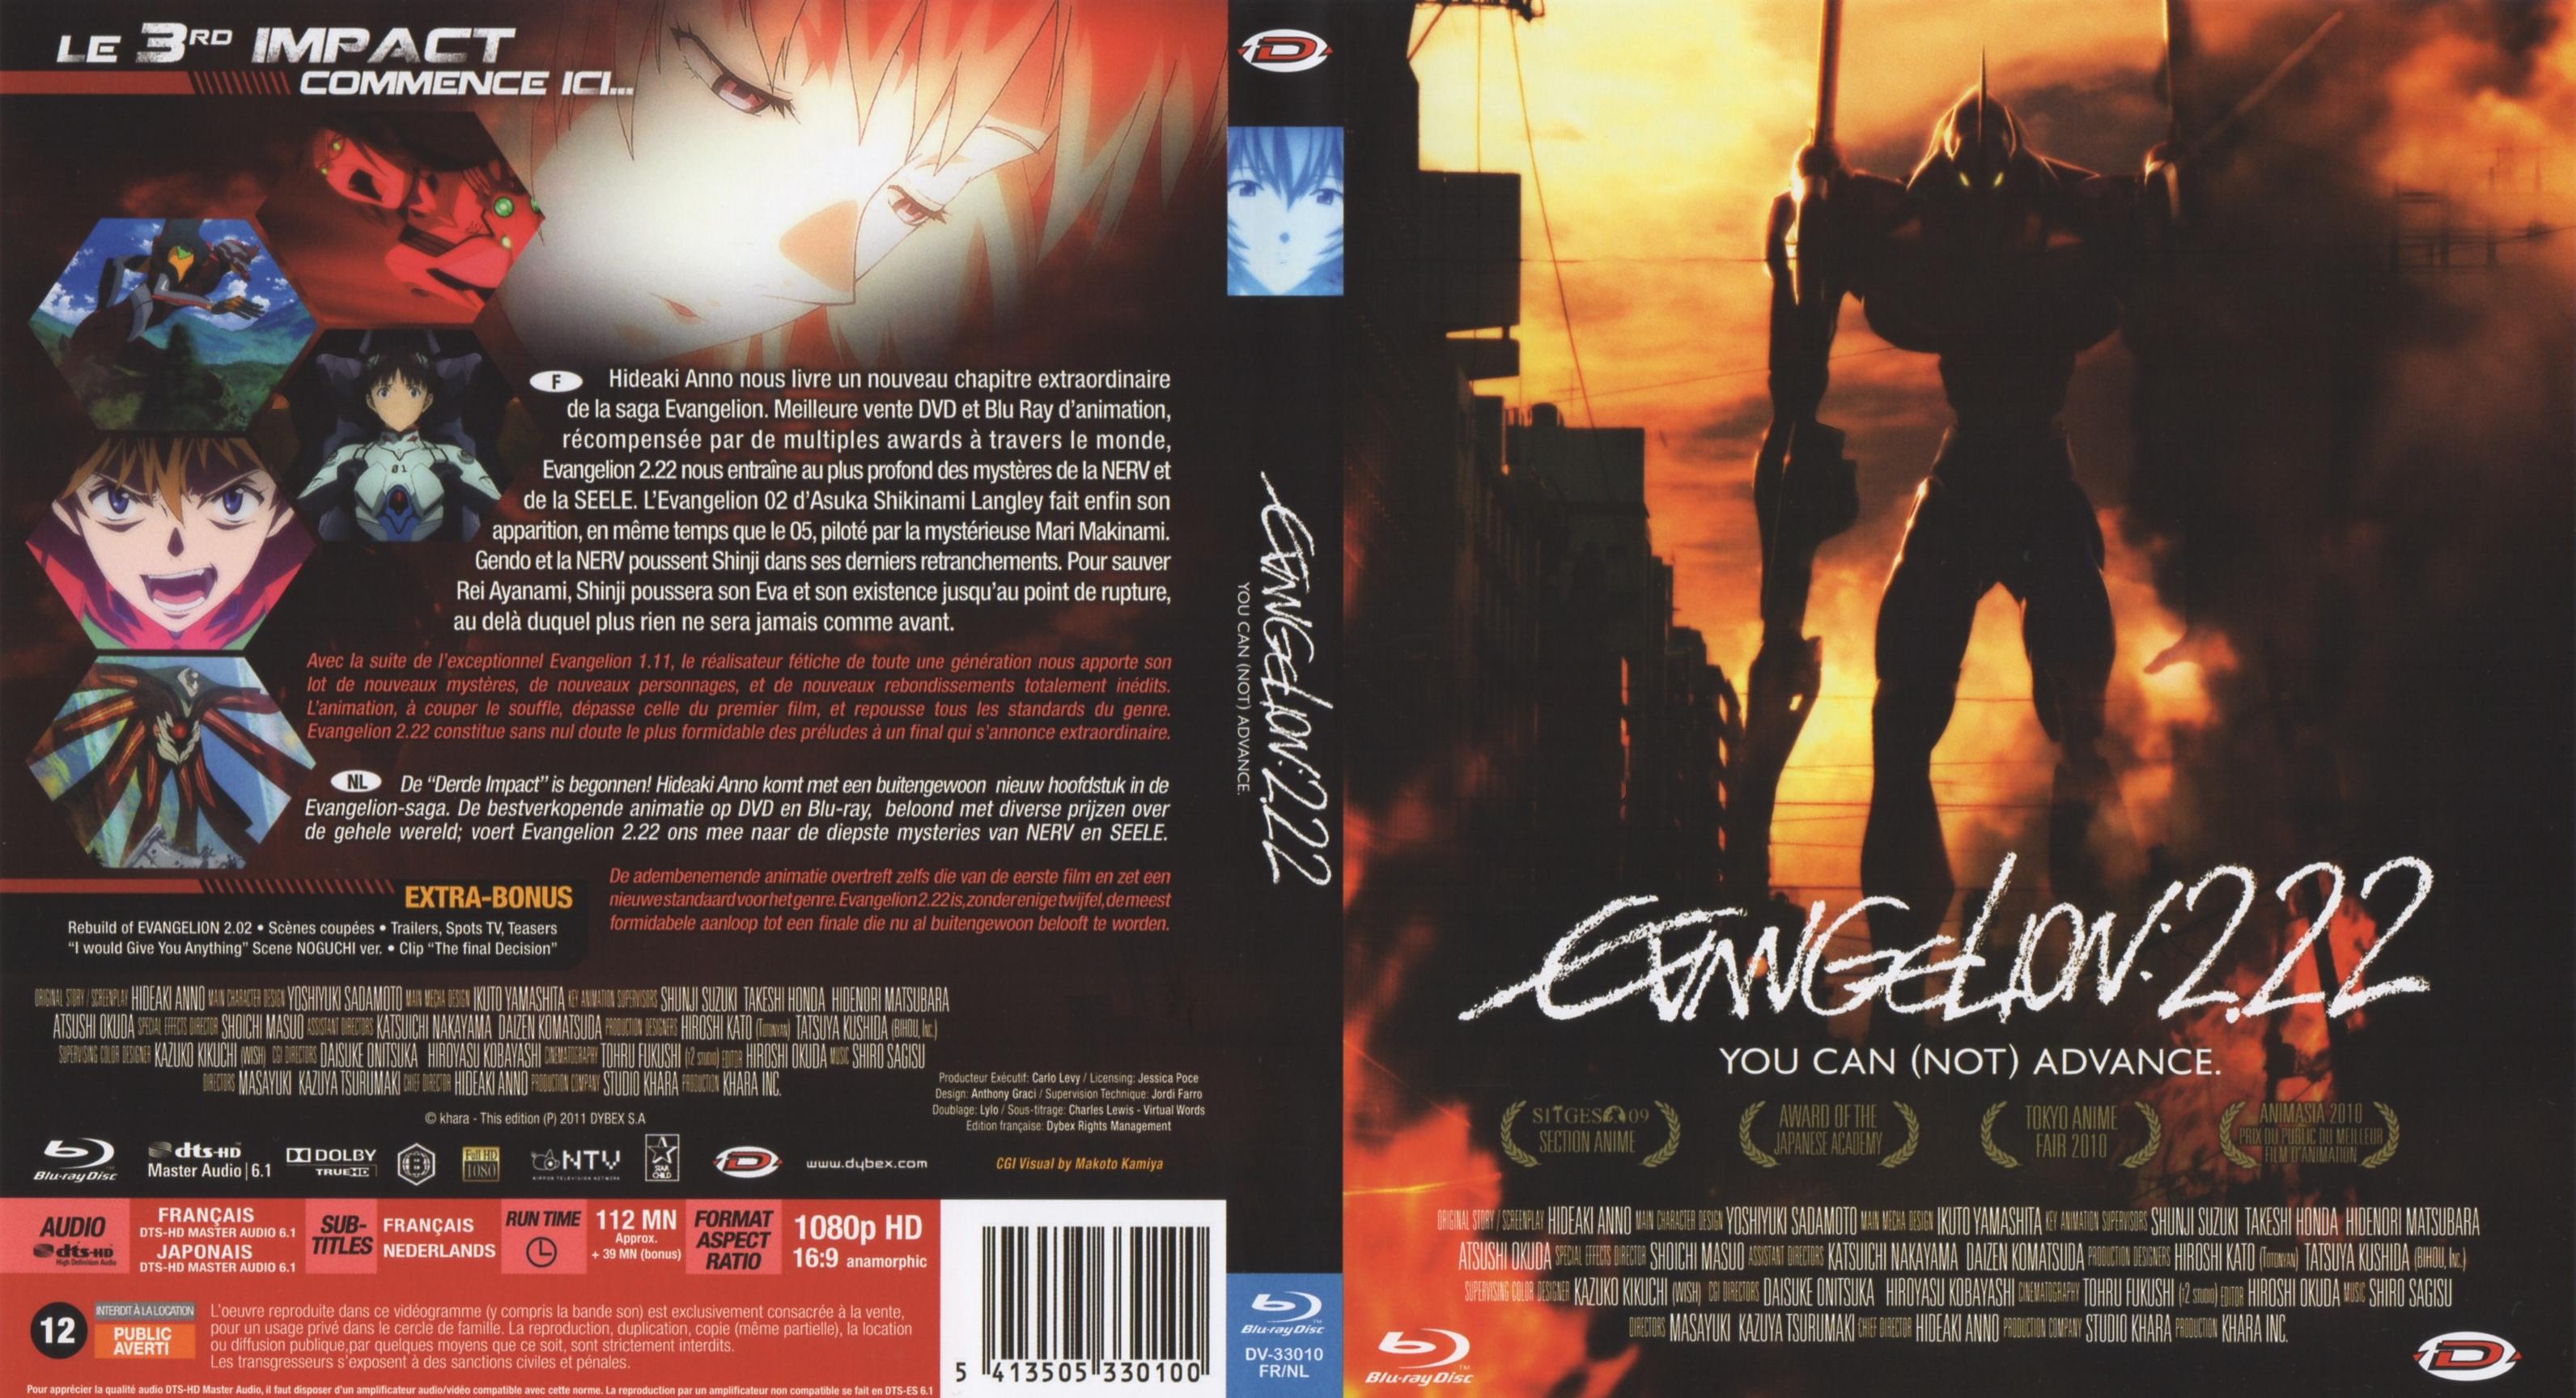 Jaquette DVD Evangelion 2 22 You Can (Not) Advance (BLU-RAY)